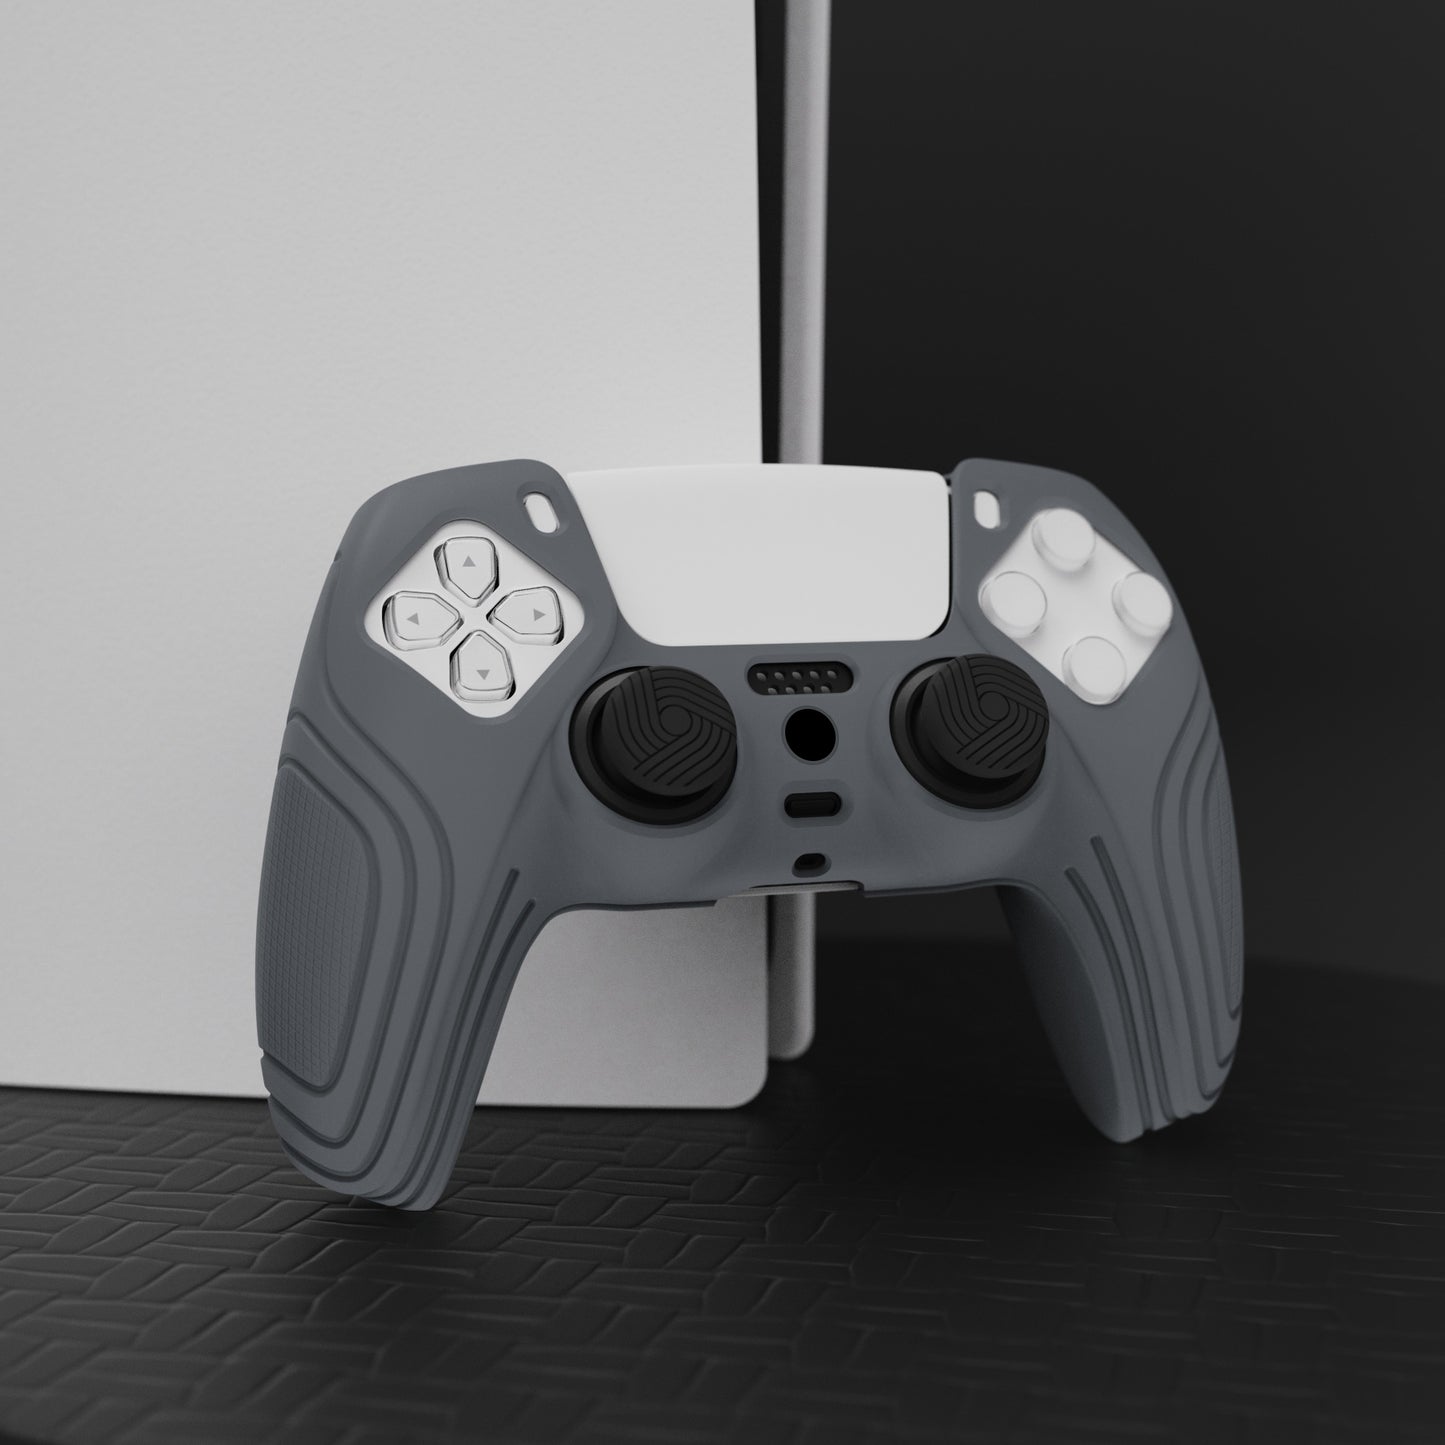 PlayVital Samurai Edition Anti-Slip Silicone Cover Skin with Thumb Grip Caps for PS5 Wireless Controller - Gray - BWPF006 PlayVital